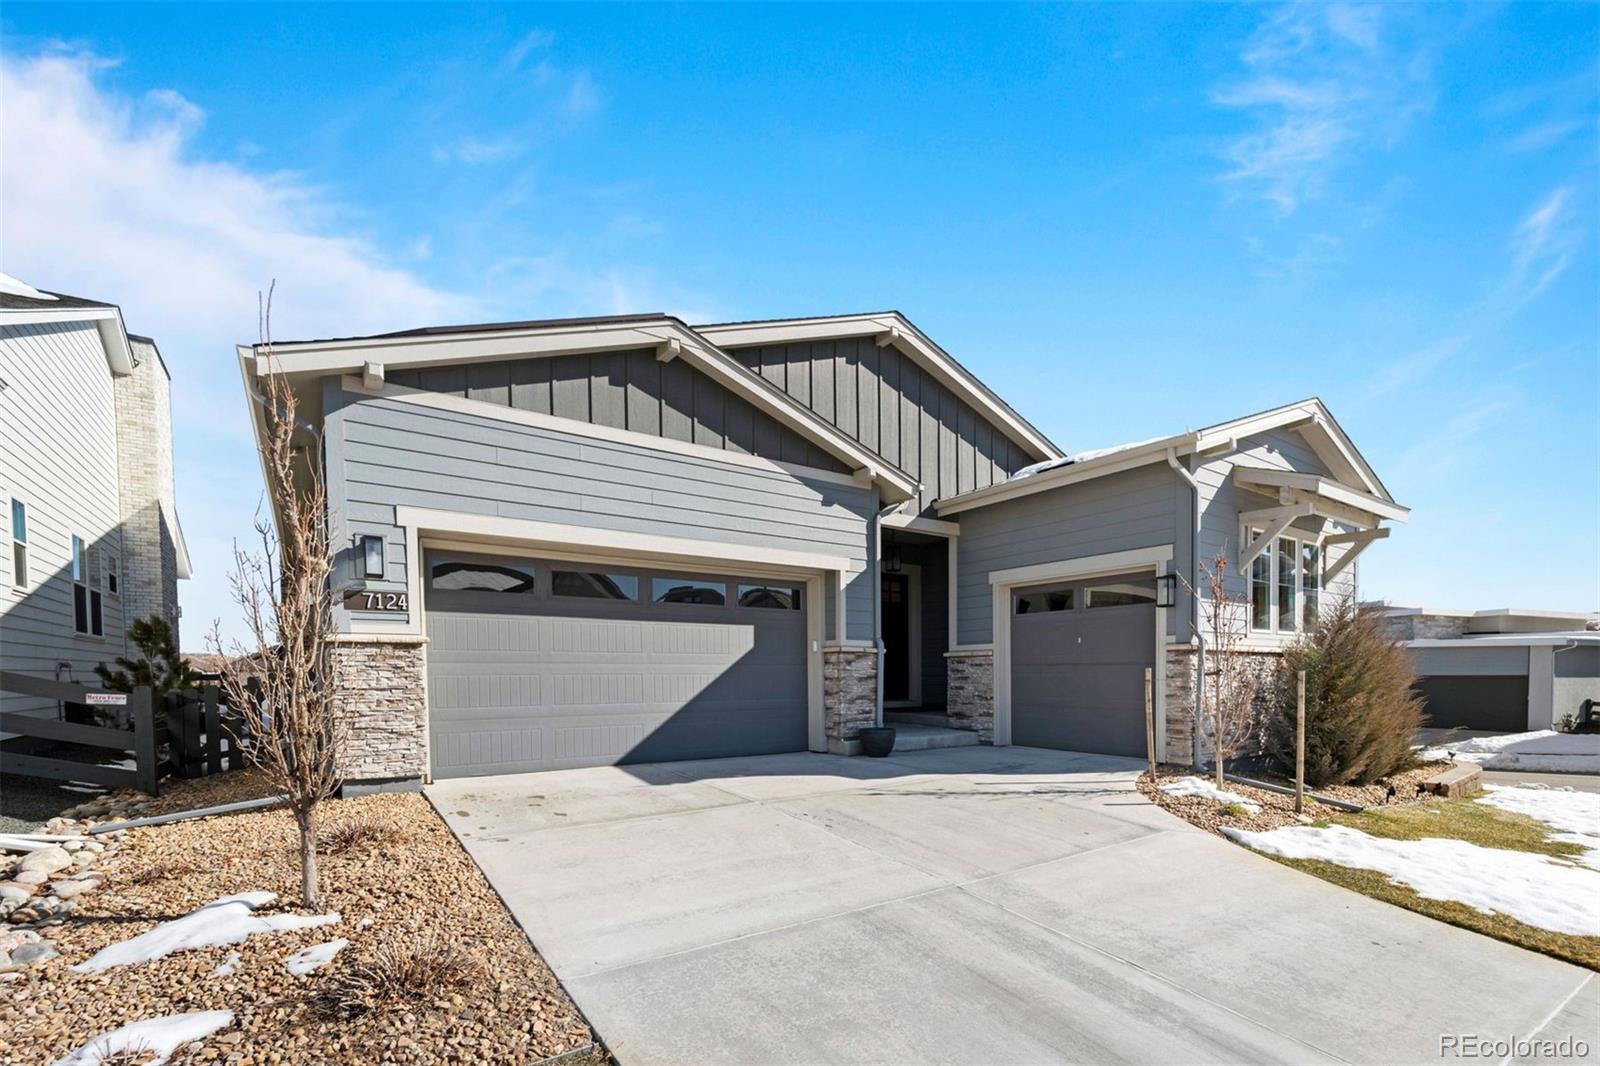 7124  Bellcove Trail, castle pines MLS: 4295313 Beds: 5 Baths: 5 Price: $1,275,000